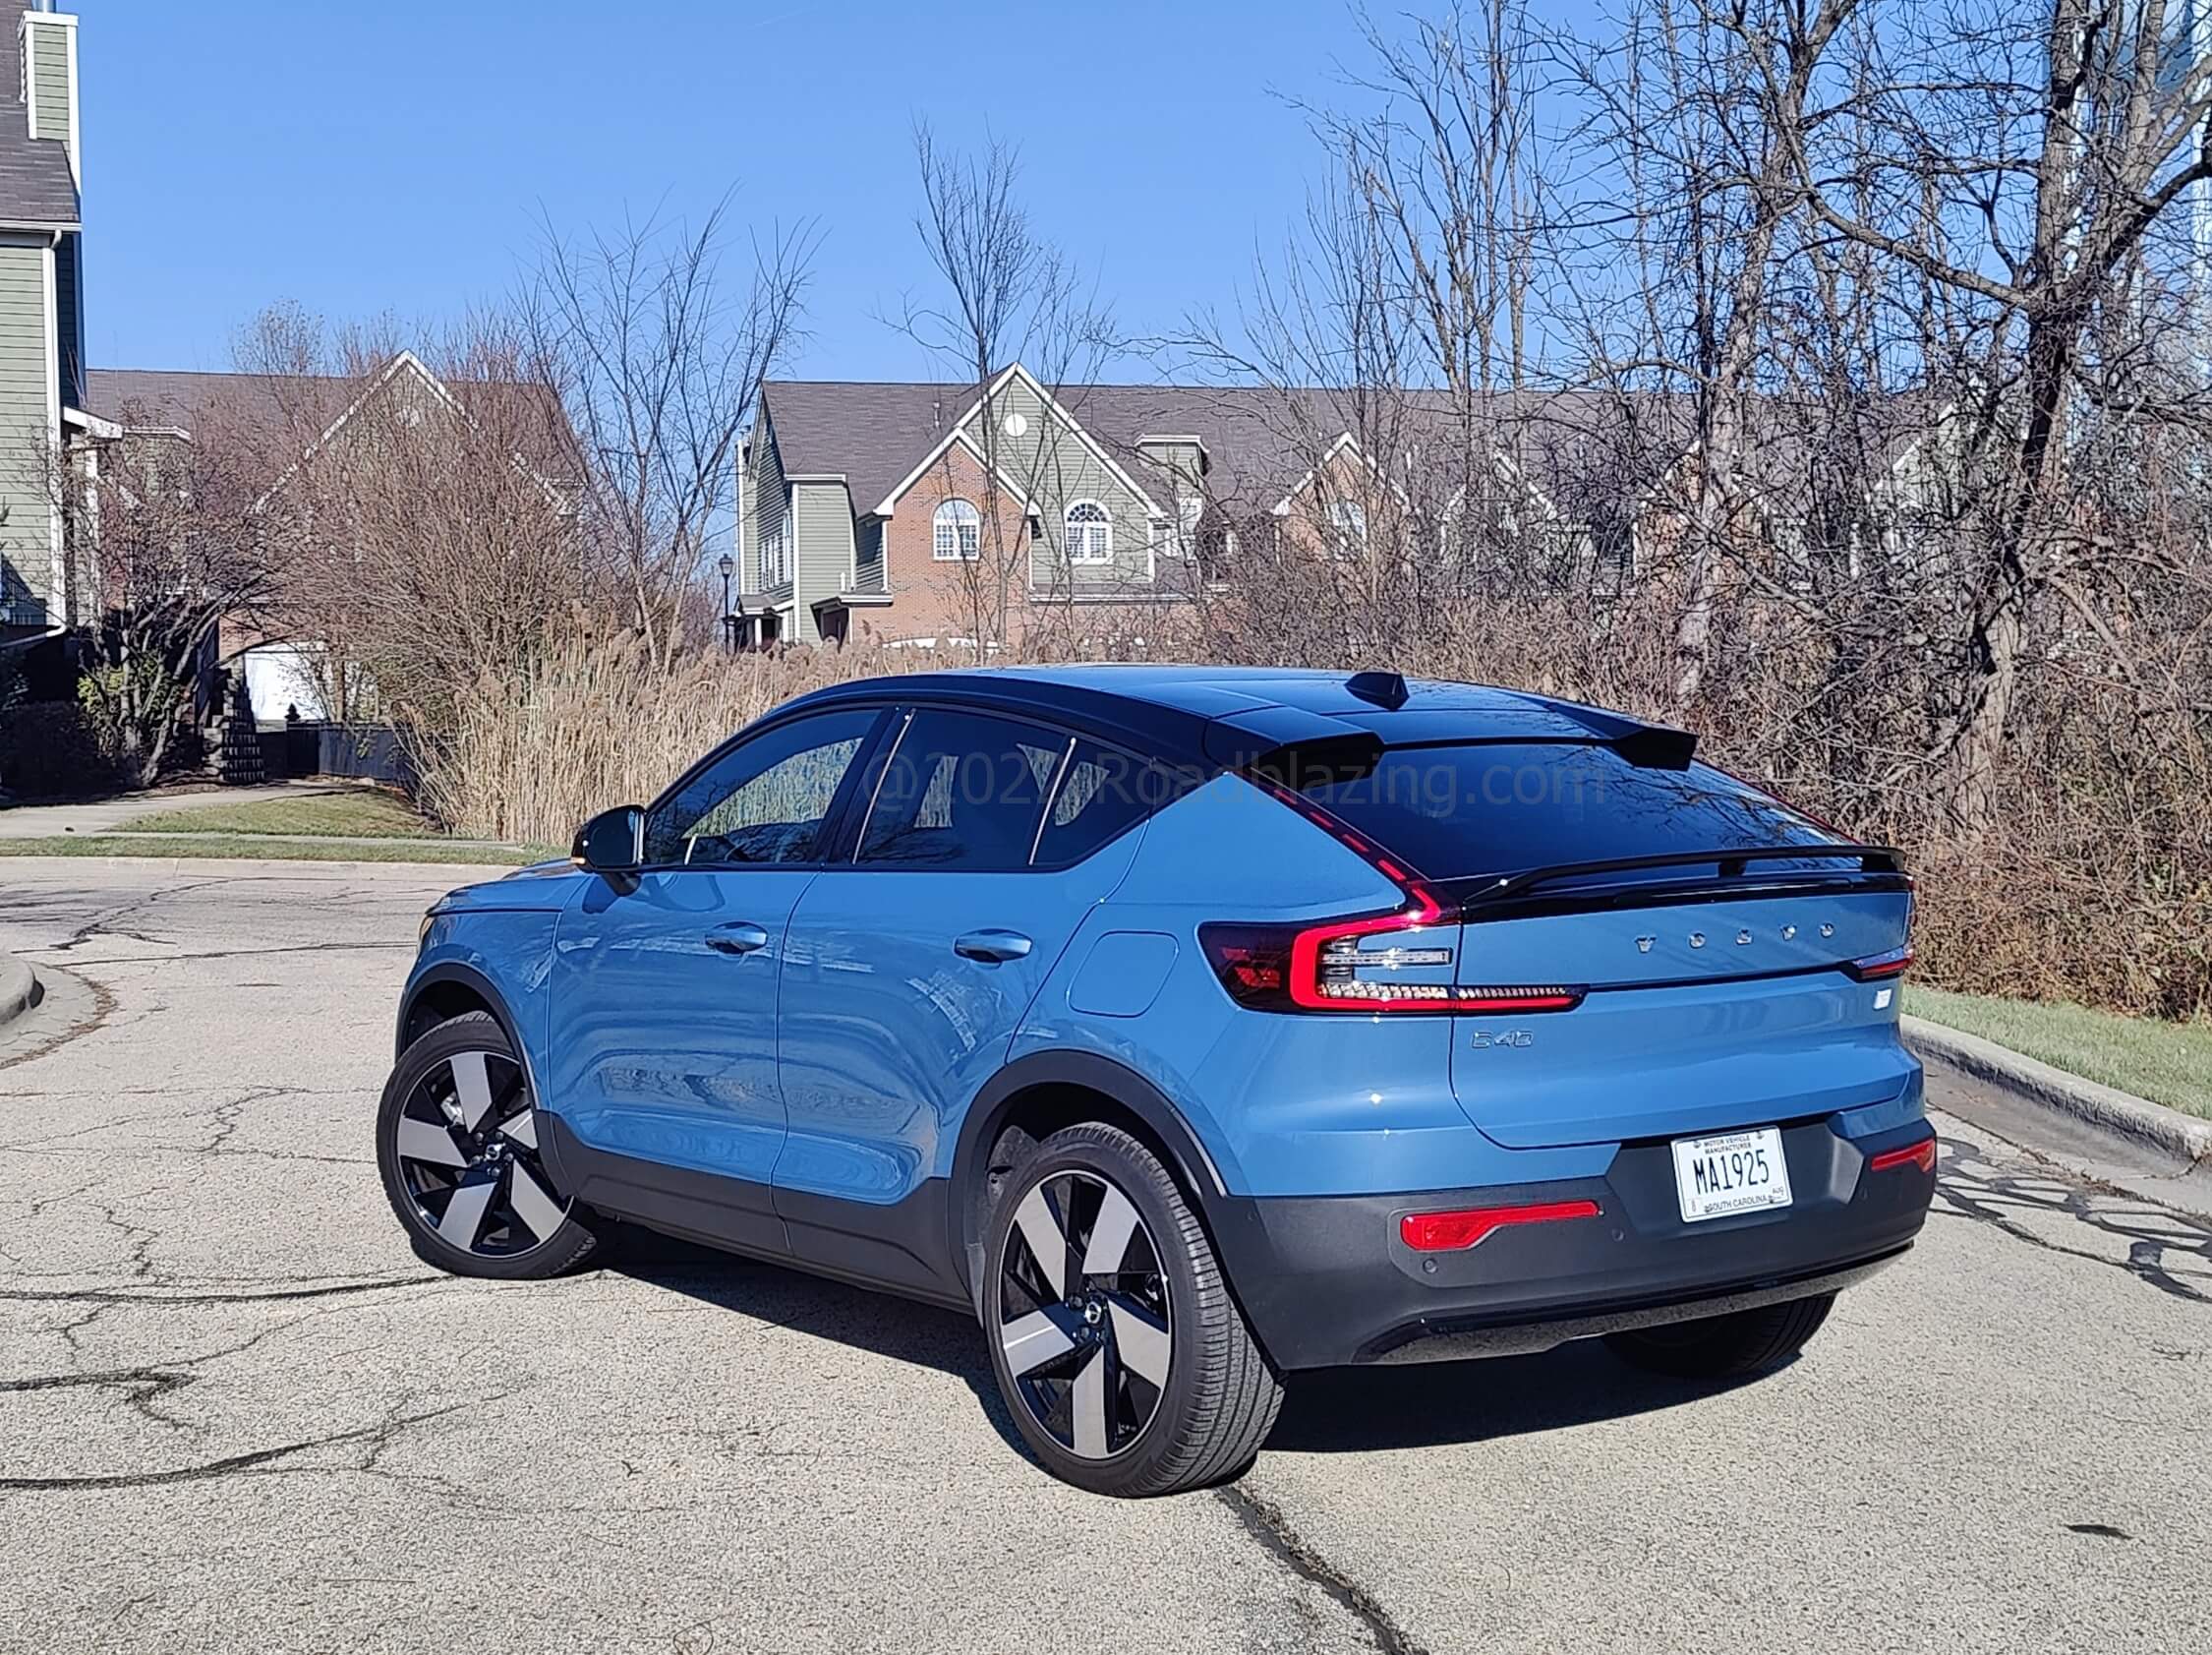 2022 Volvo C40 Recharge Twin Ultimate EV: $1750 price premium to lose cargo space but gain a sensuous fastback posterior and be exclusively EV powered.